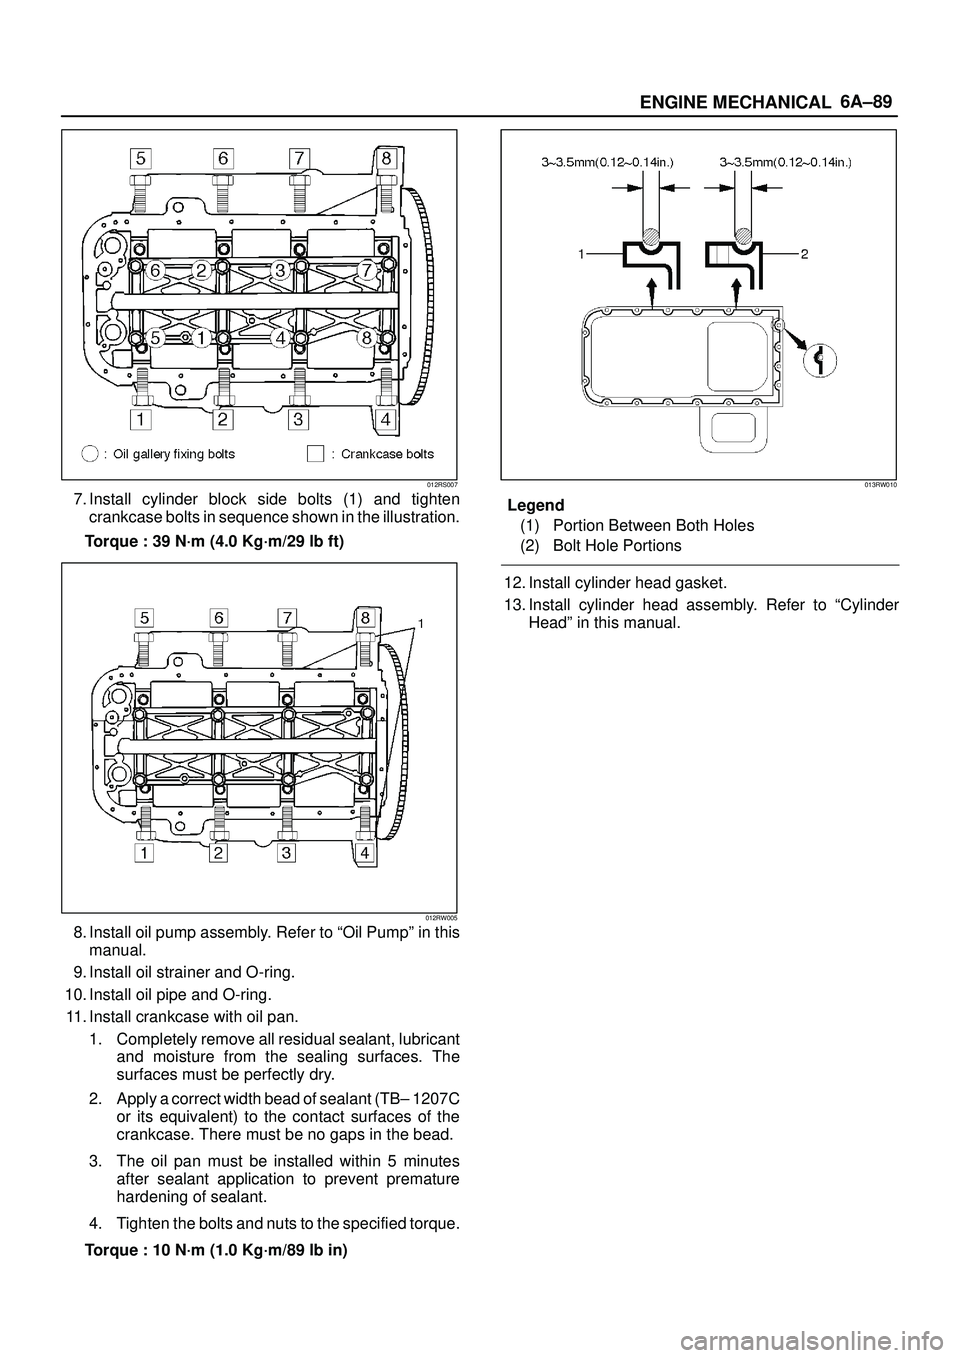 ISUZU TROOPER 1998  Service Repair Manual 6A±89
ENGINE MECHANICAL
012RS007
7. Install cylinder block side bolts (1) and tighten
crankcase bolts in sequence shown in the illustration.
Torque : 39 N´m (4.0 Kg´m/29 lb ft)
012RW005
8. Install 